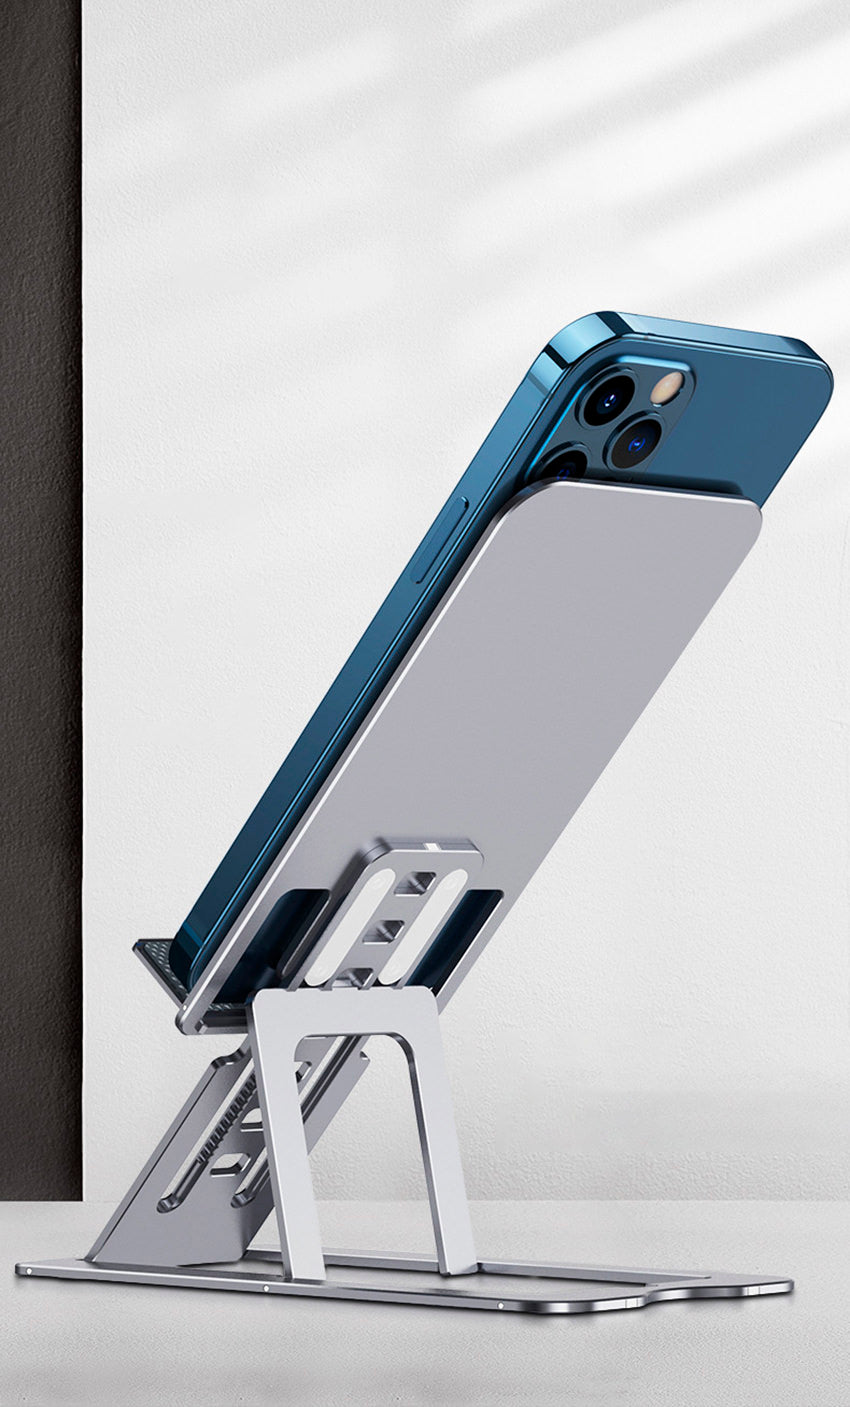 Cell phone holder with 7 angle adjustment levels